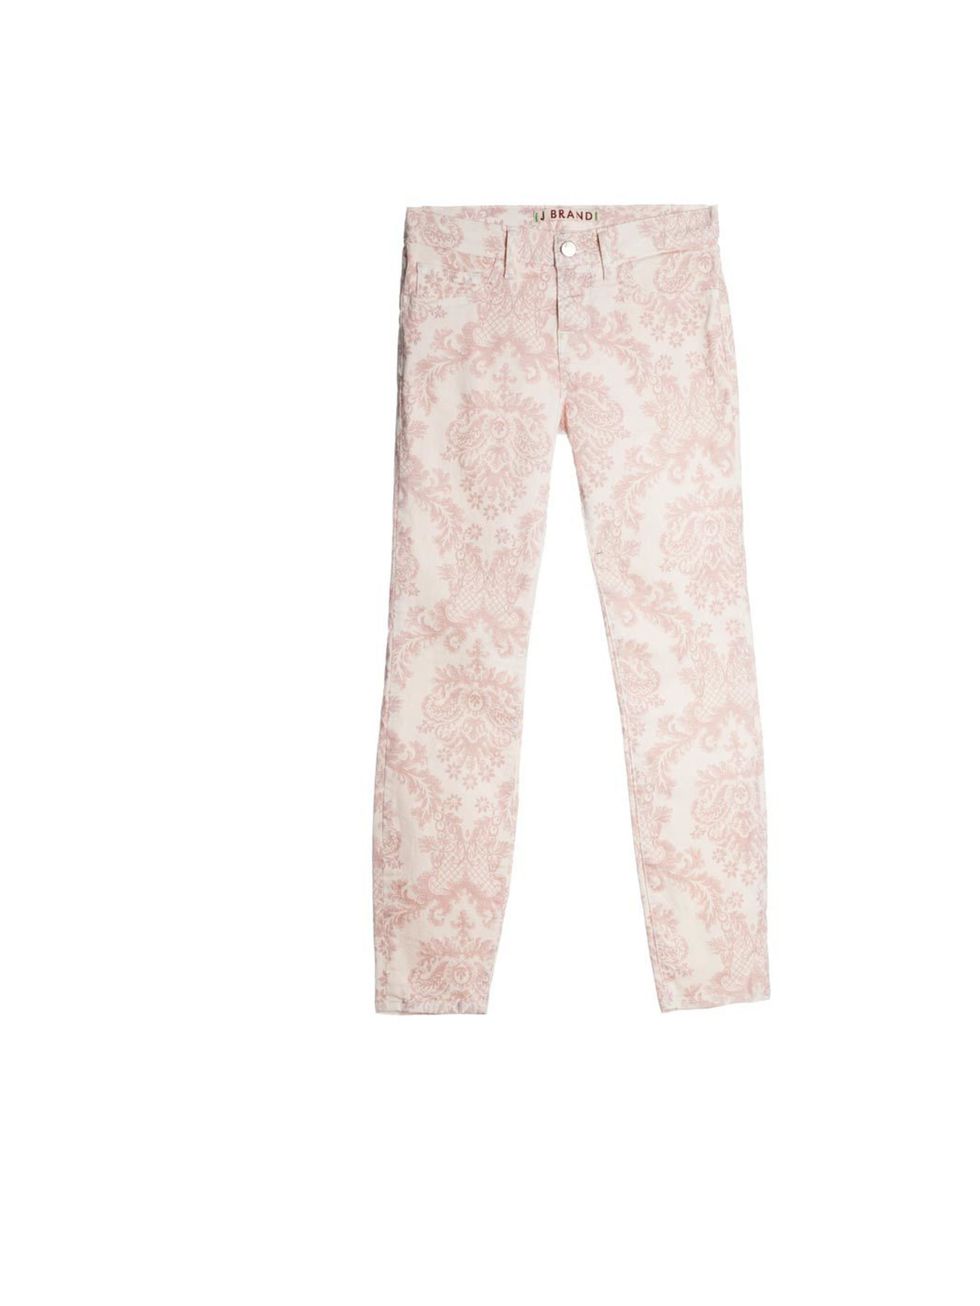 <p>J Brand printed jeans, £240, at Harrods, for stockists call 0207 730 1234</p>